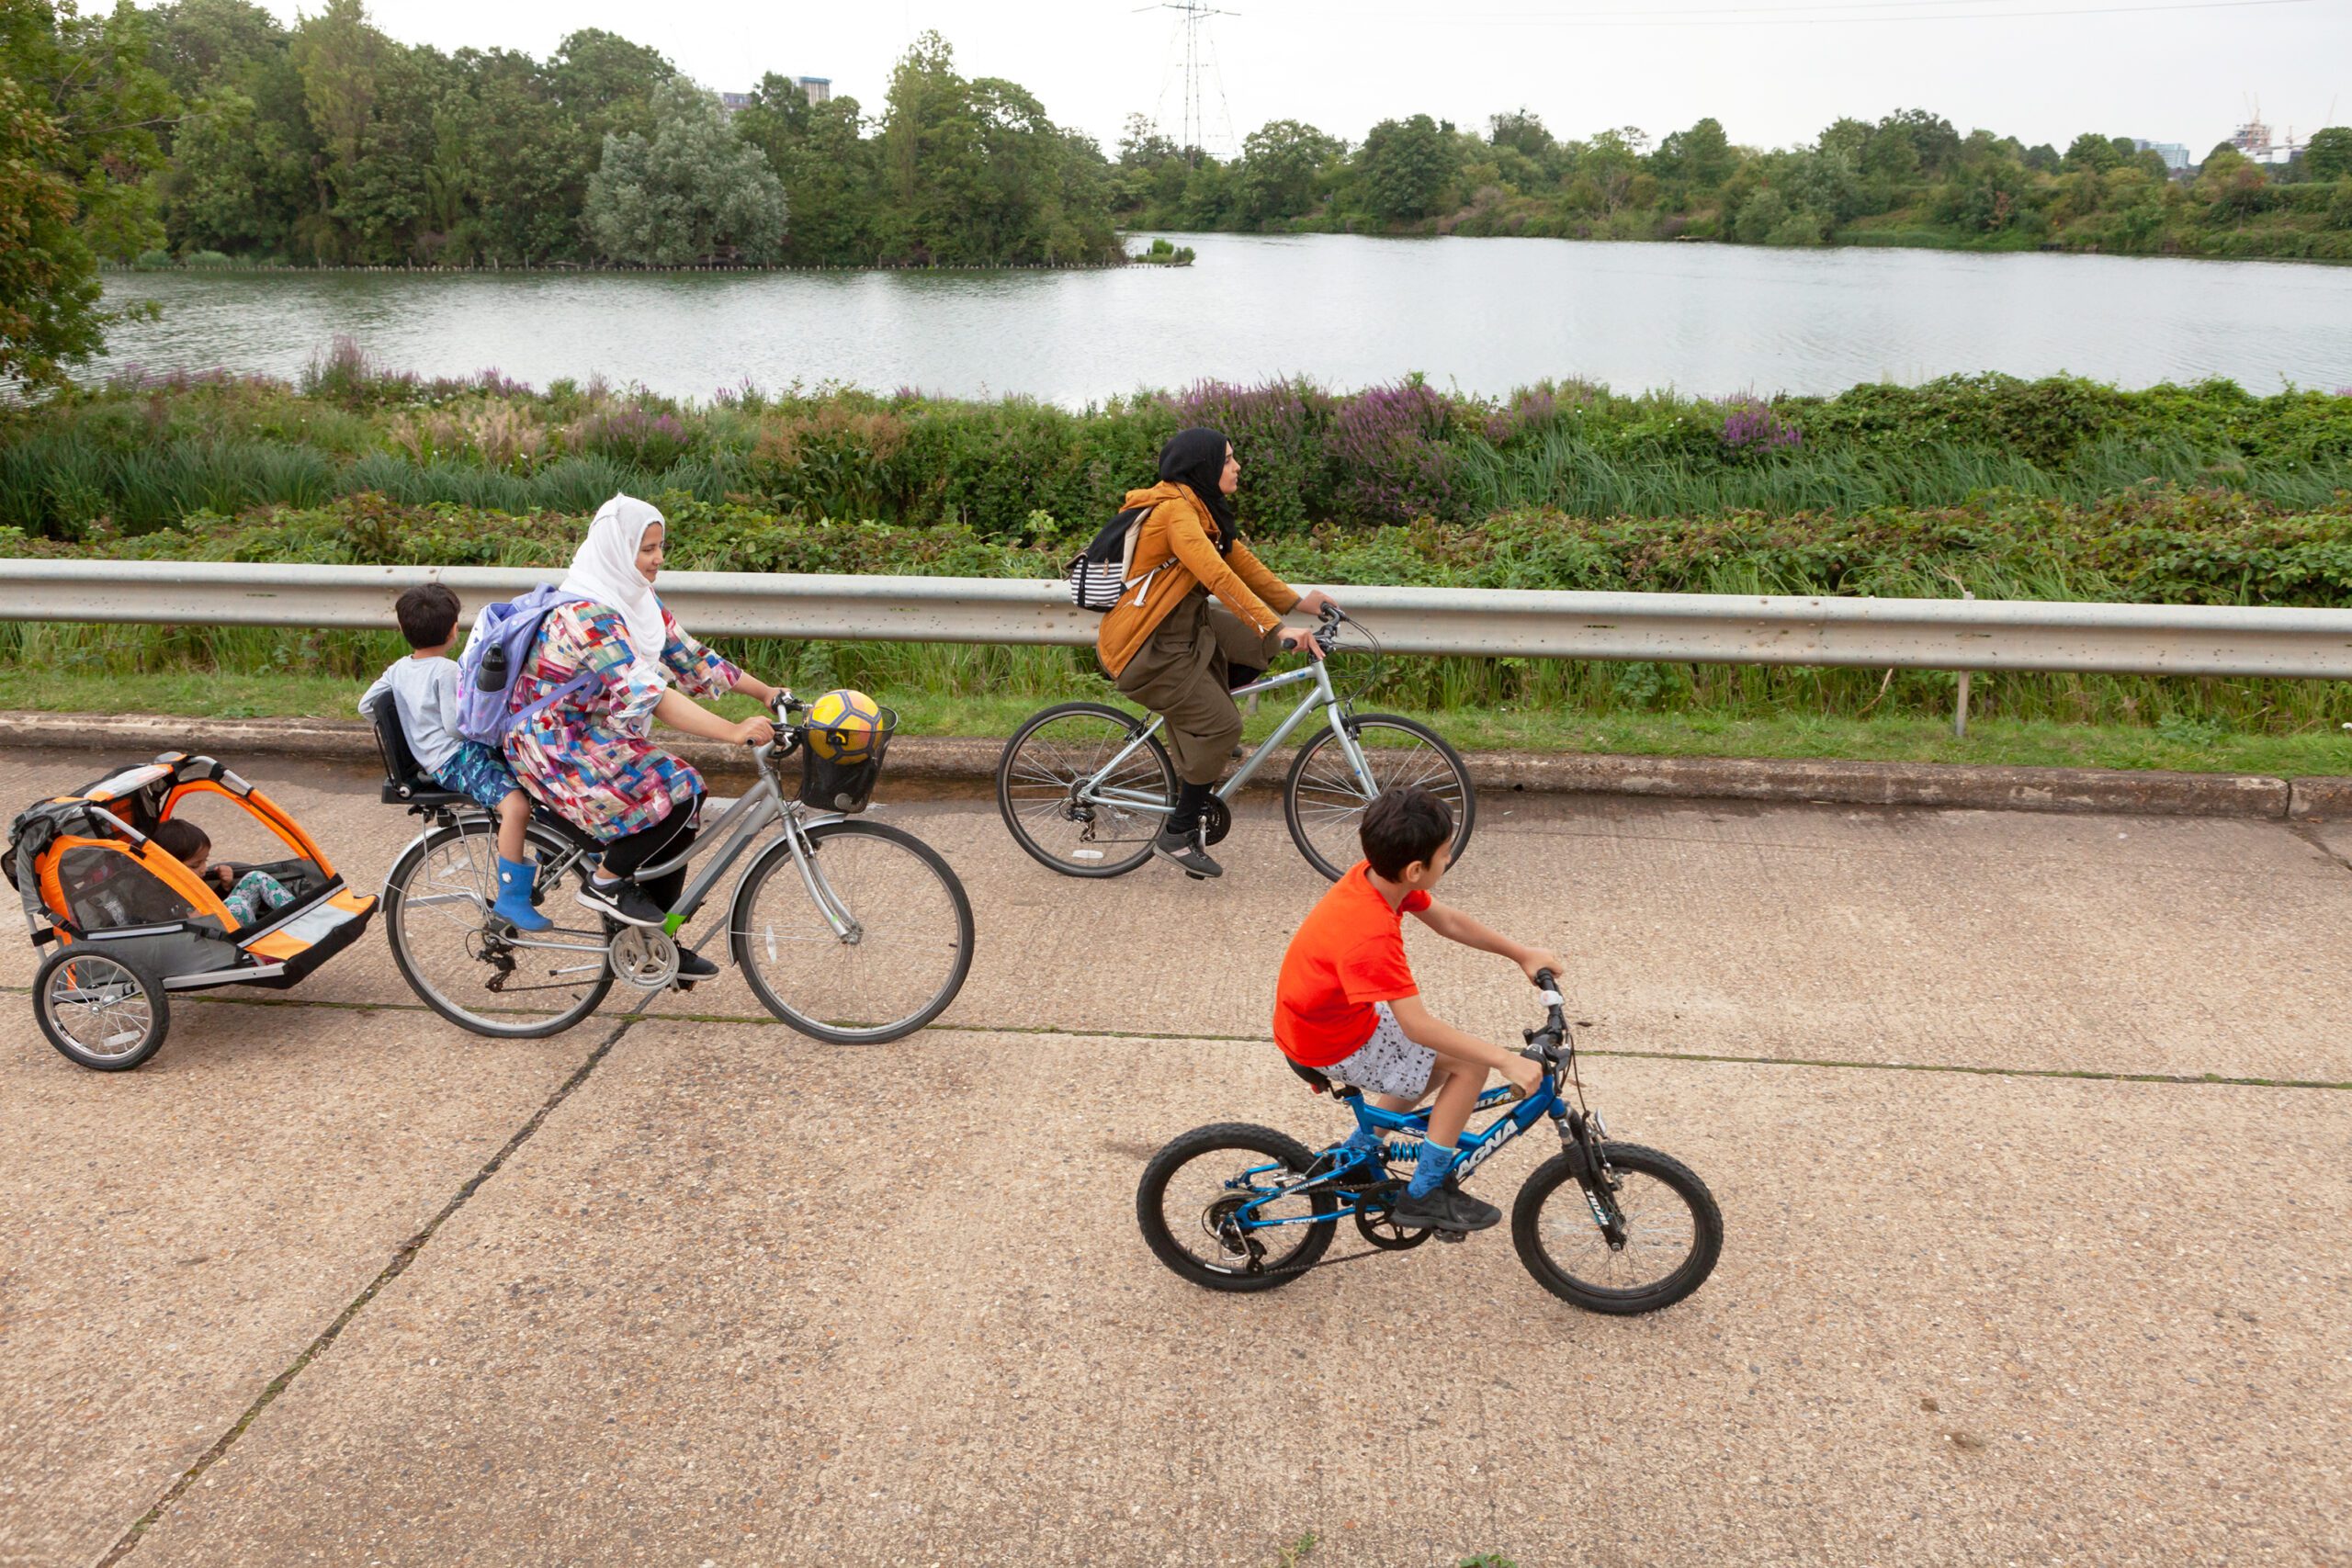 A group of people, including two women in headscarves, a small child on the back of a bike and another in a tag along cycle carrier, plus an older child on his own cycle, cycle past a reservoir